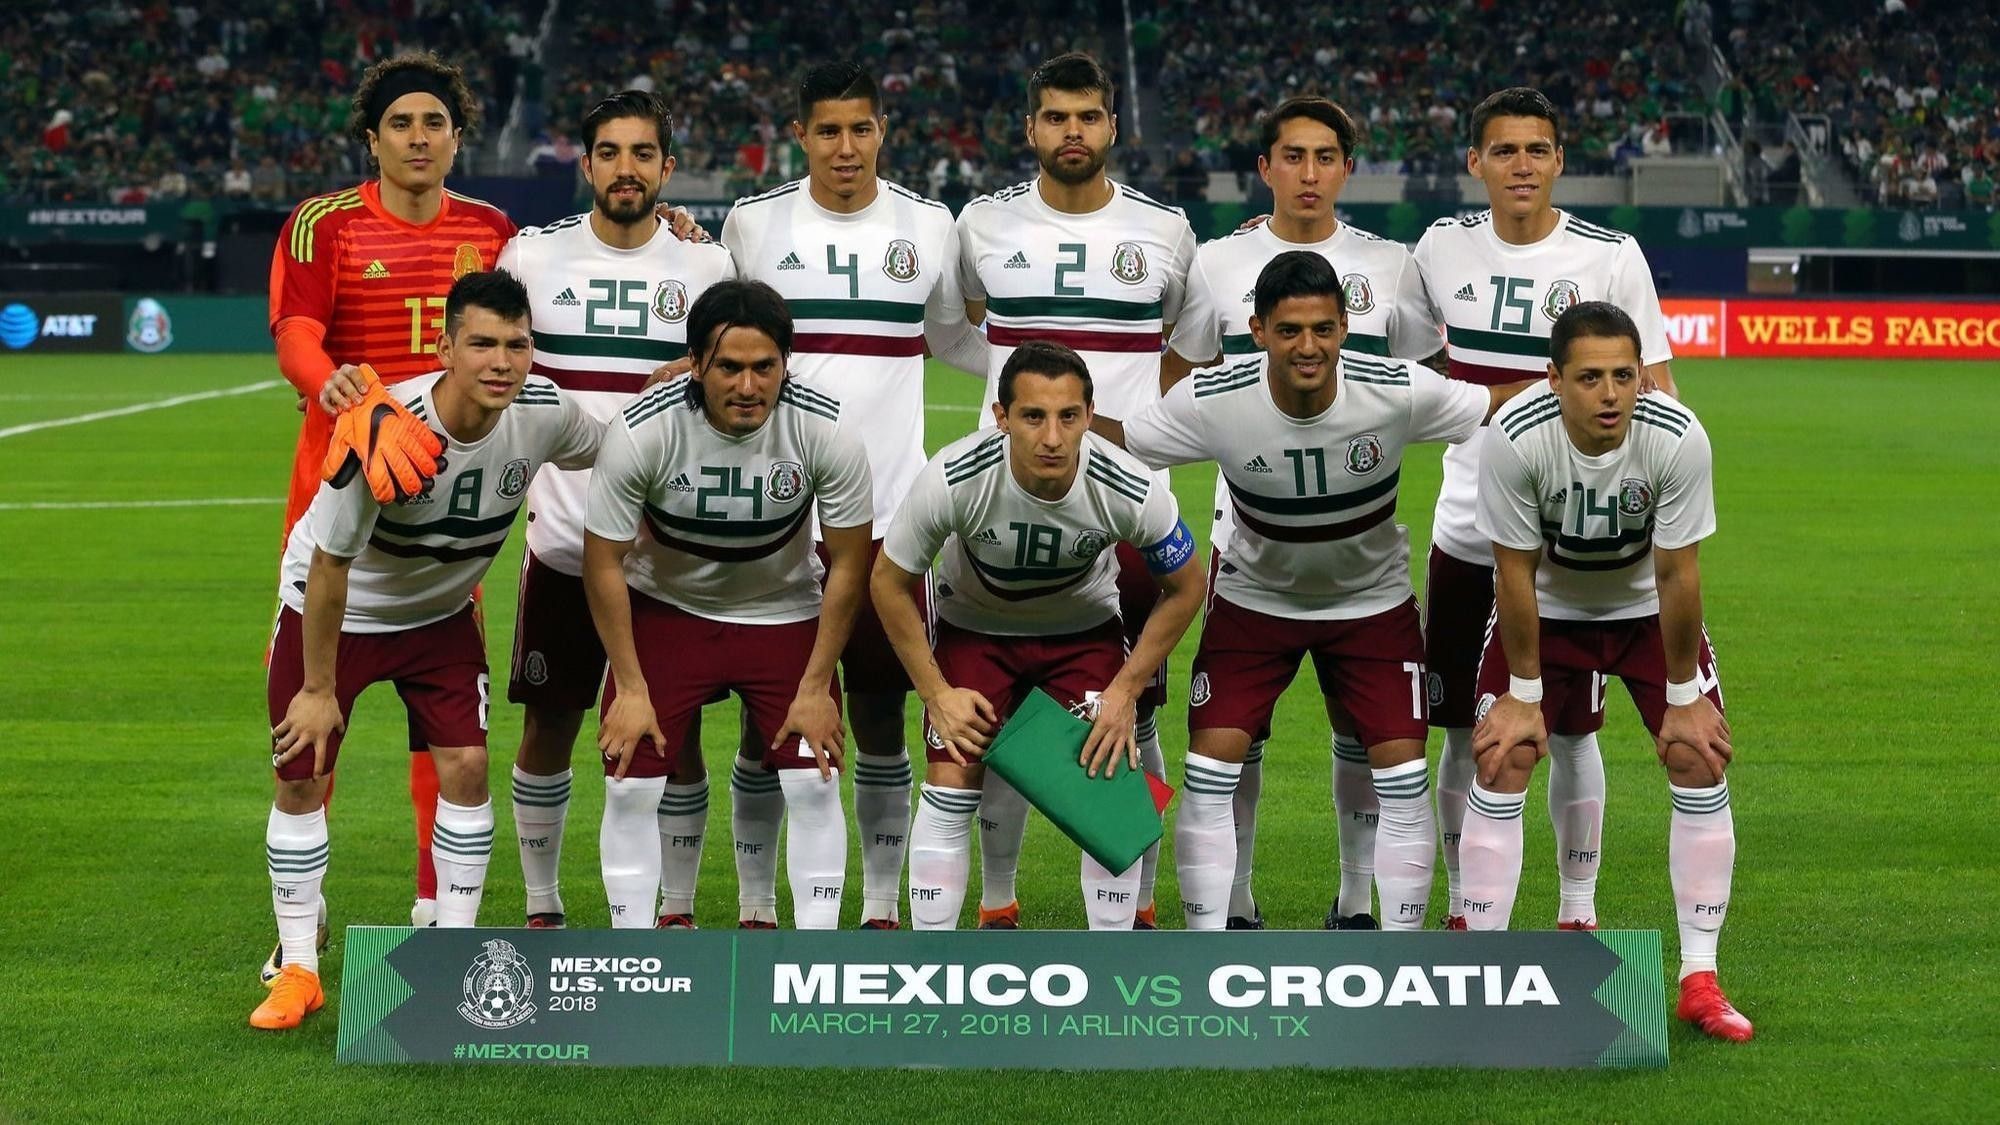 Mexican Soccer Team 2018 Wallpaper (64+ images)